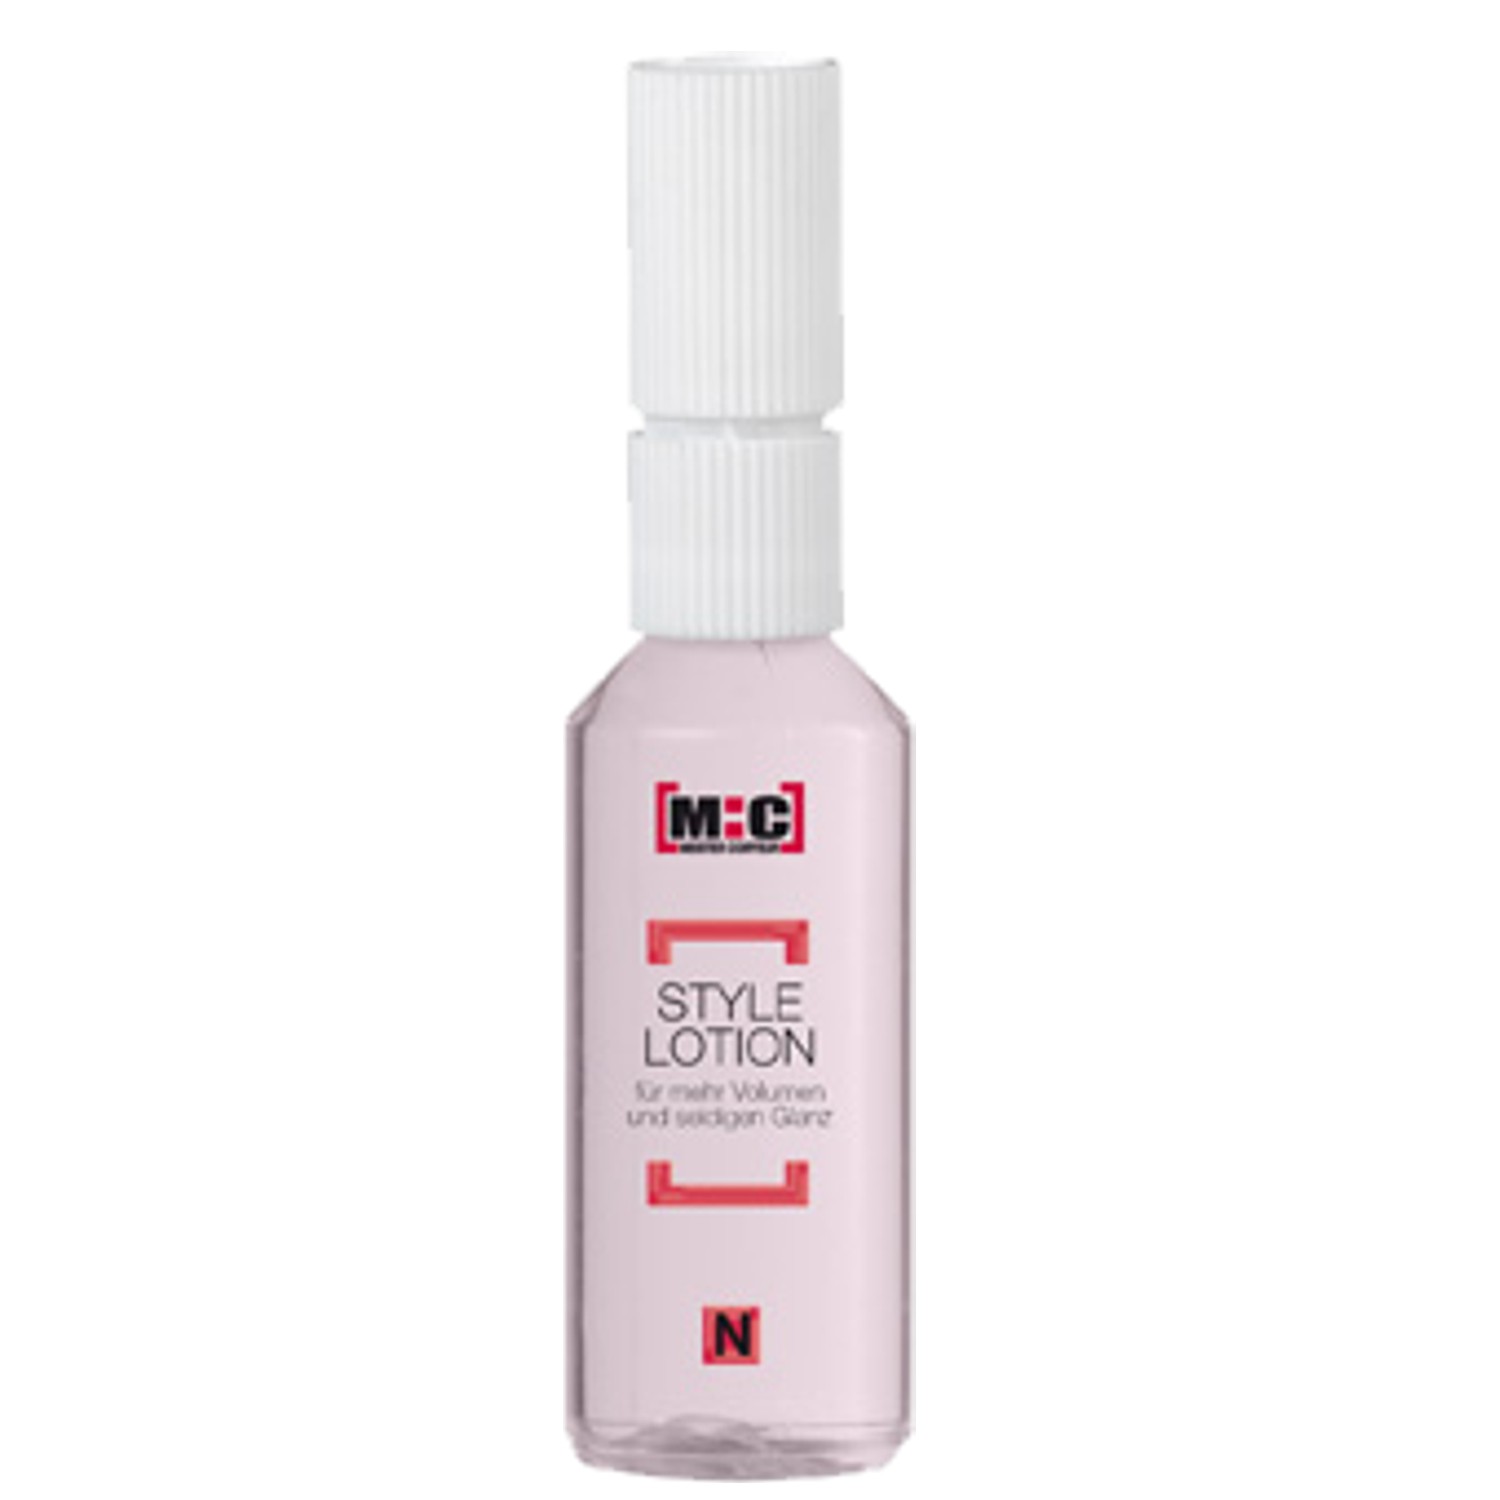 Meister Coiffeur M:C Style Lotion N 20 ml